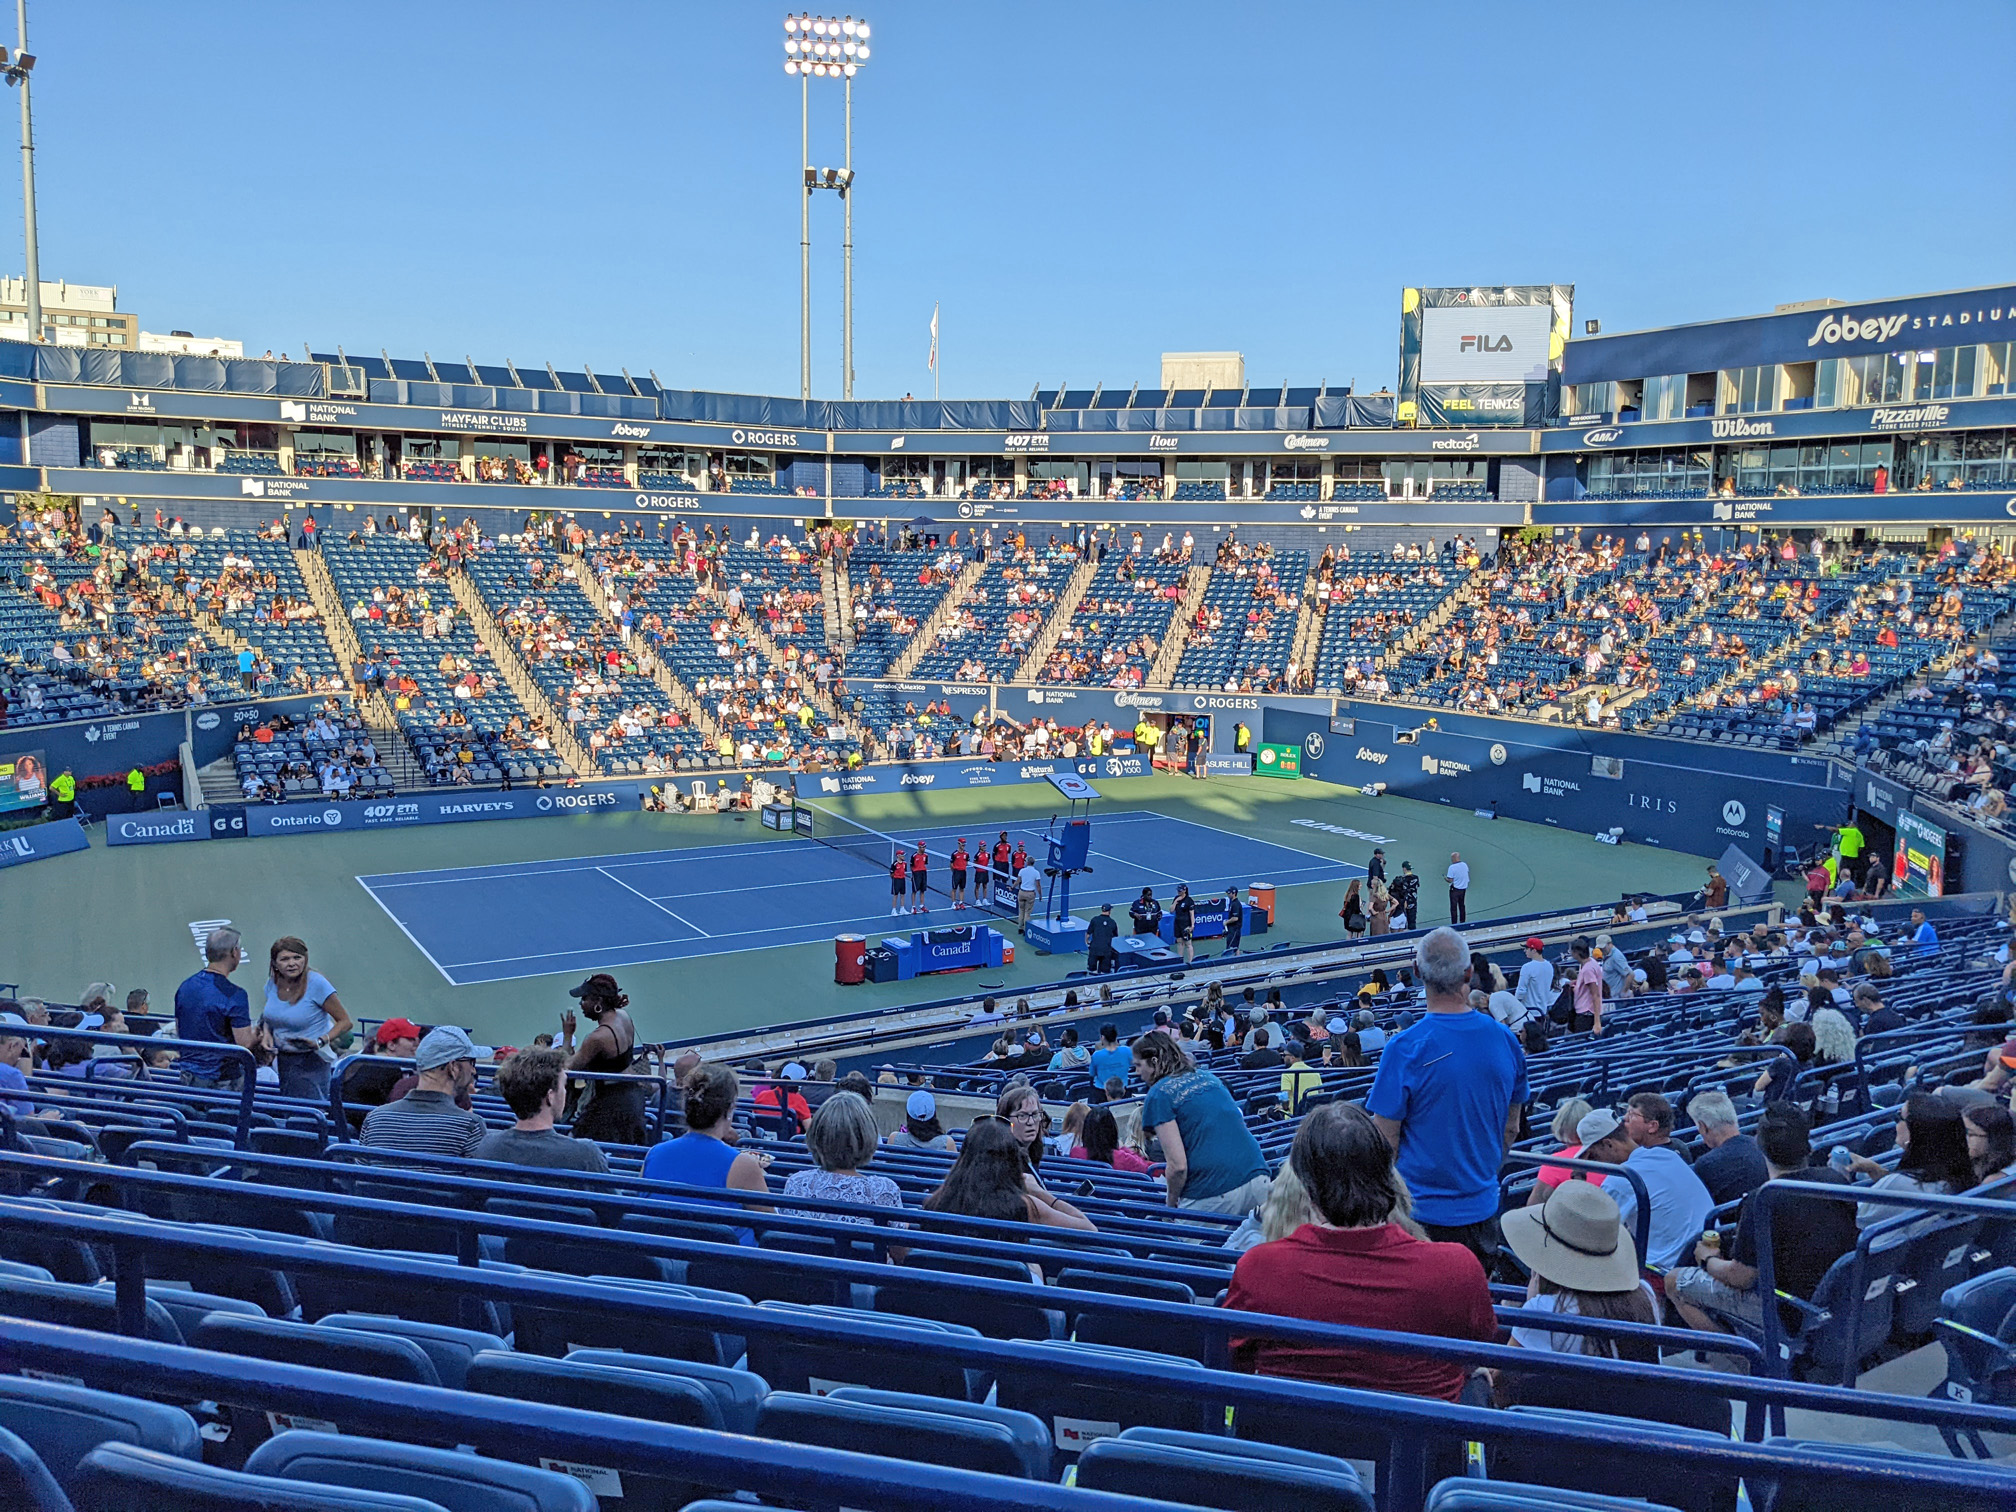 At the National Bank Open Tennis Tournament